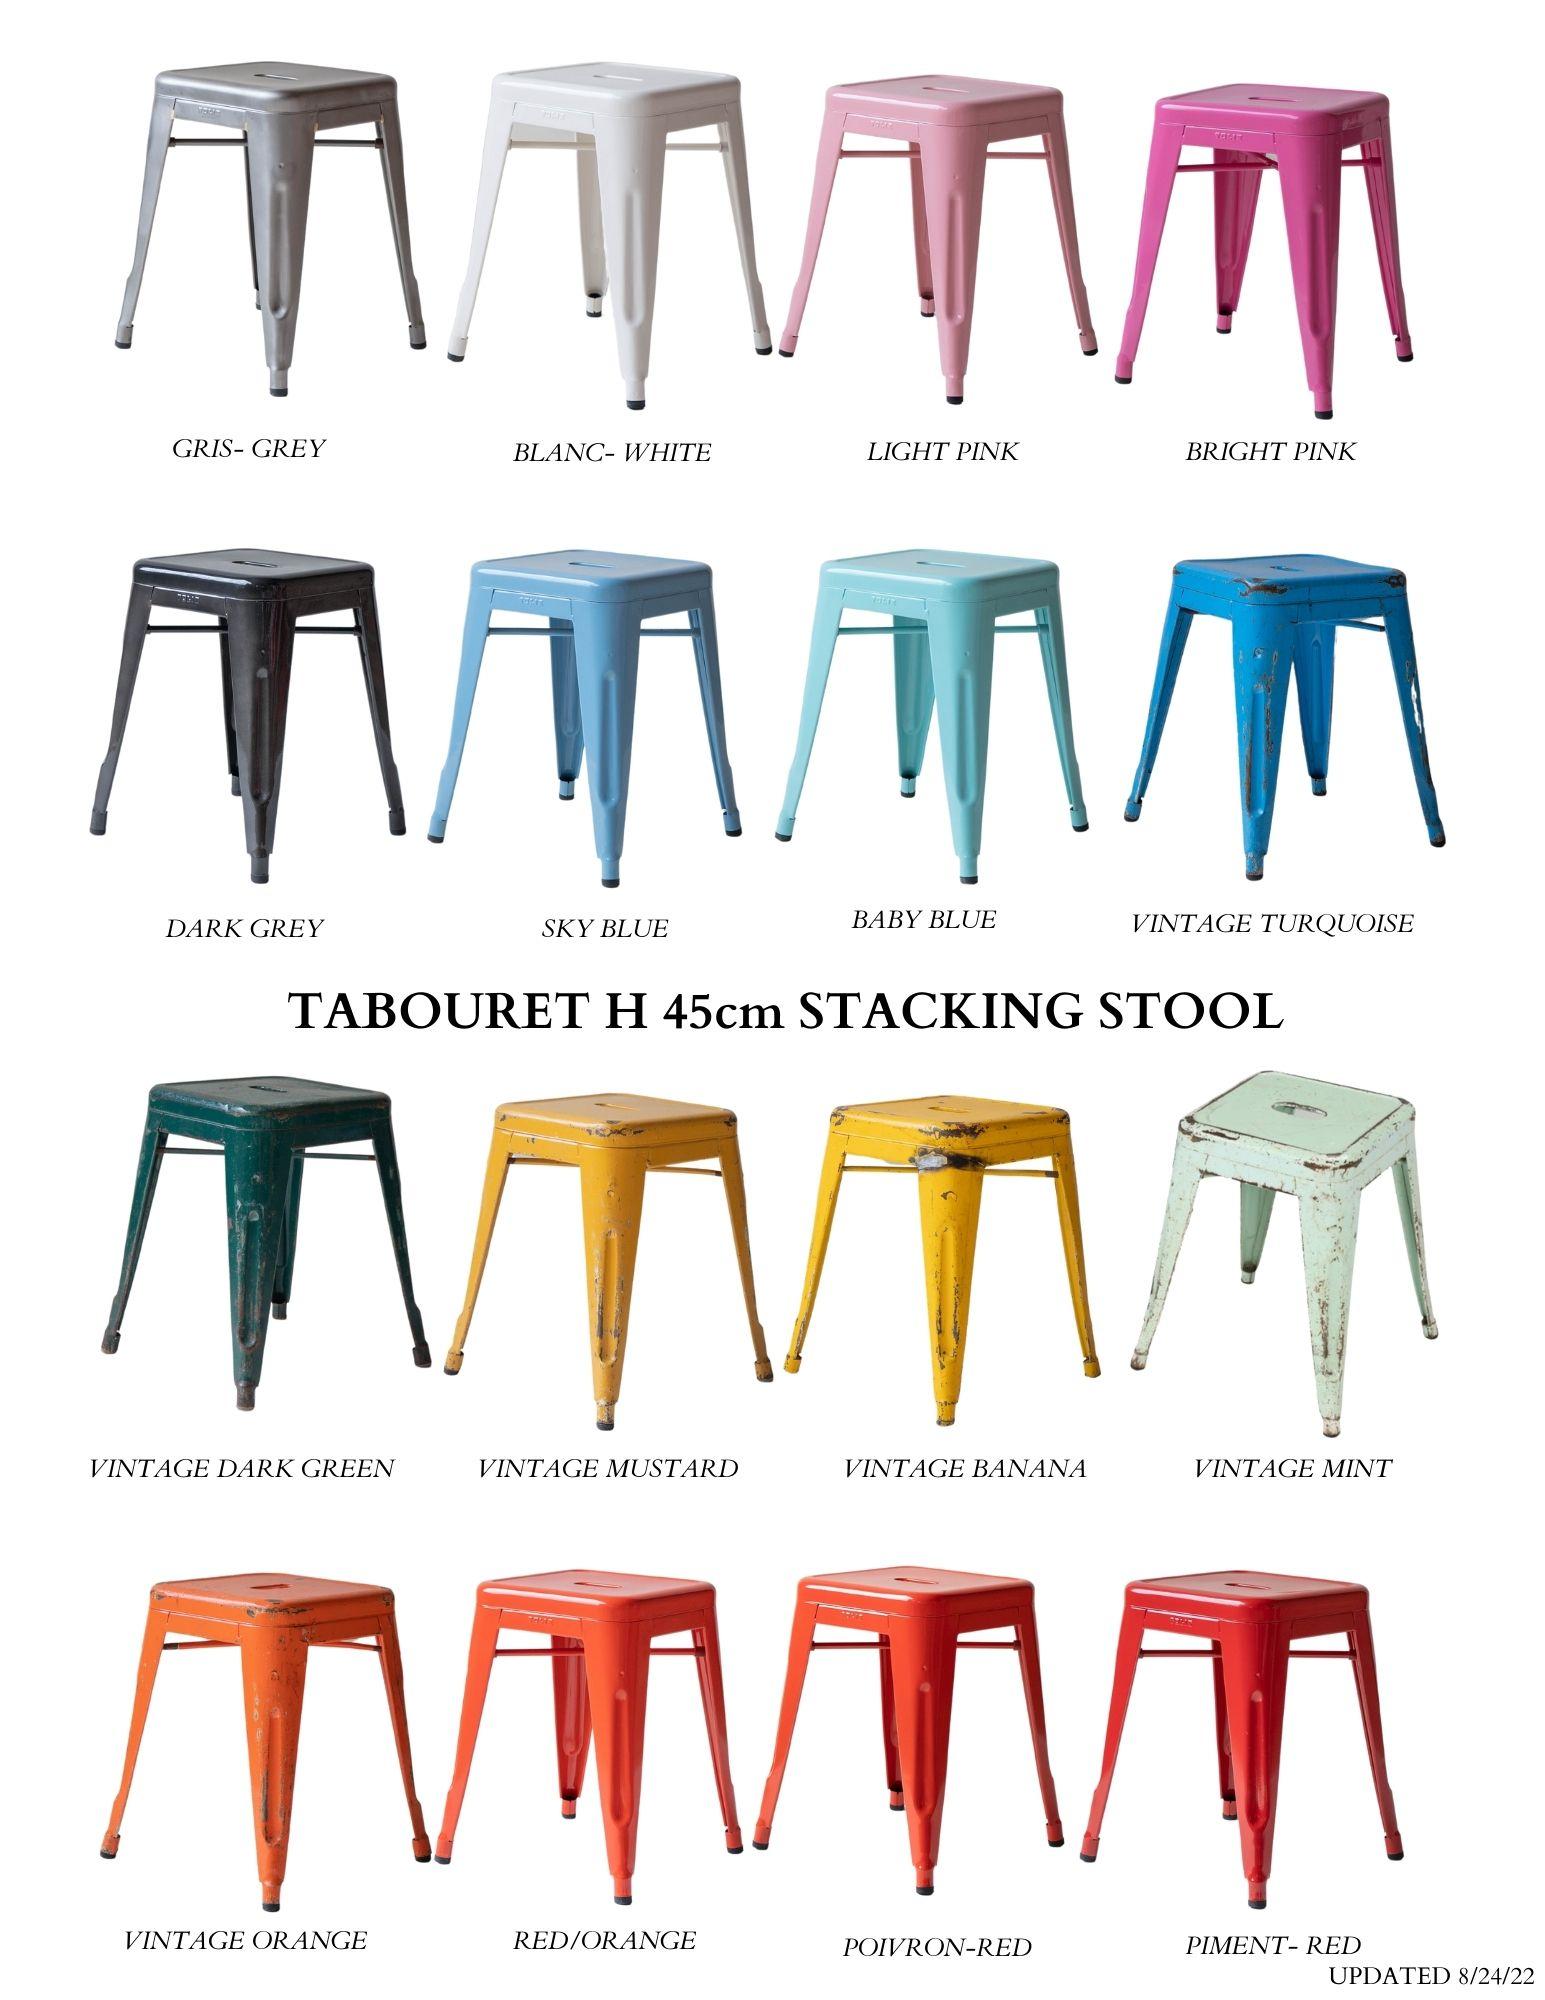 Contemporary Genuine Tolix Stacking Stools 100's Showroom Samples to Choose from Most Colors